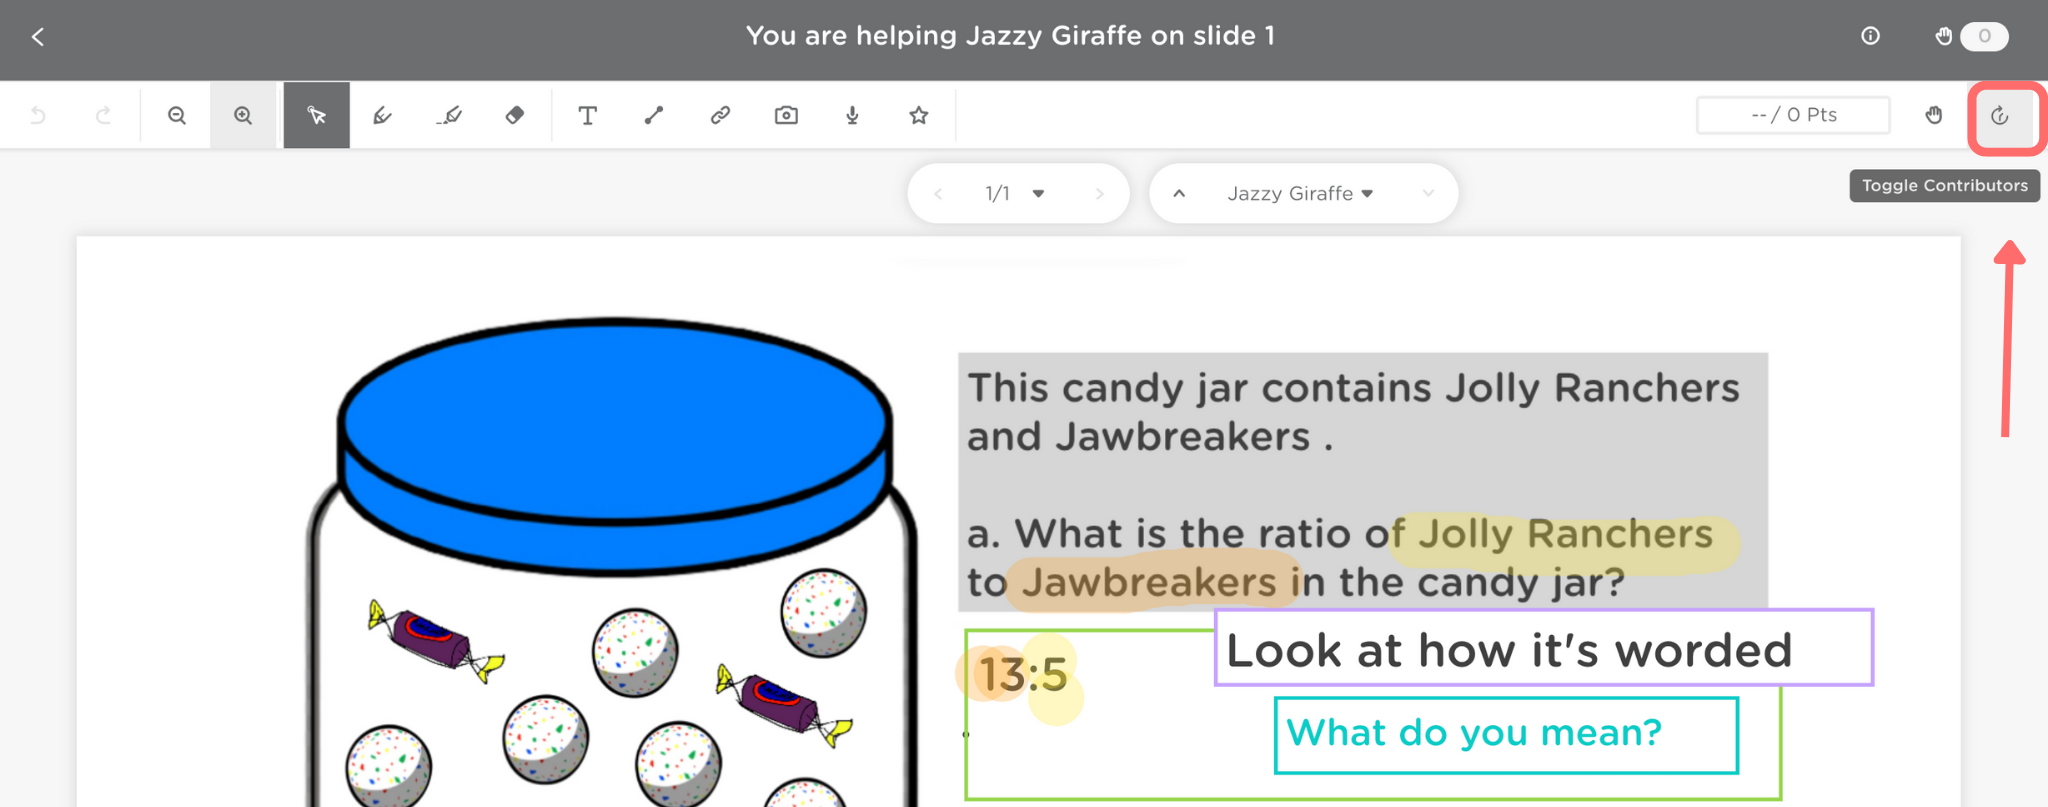 The student, Jazzy Giraffe's, slide 1 is shown. The Toggle Contributors button is highlighted in the top-right corner.